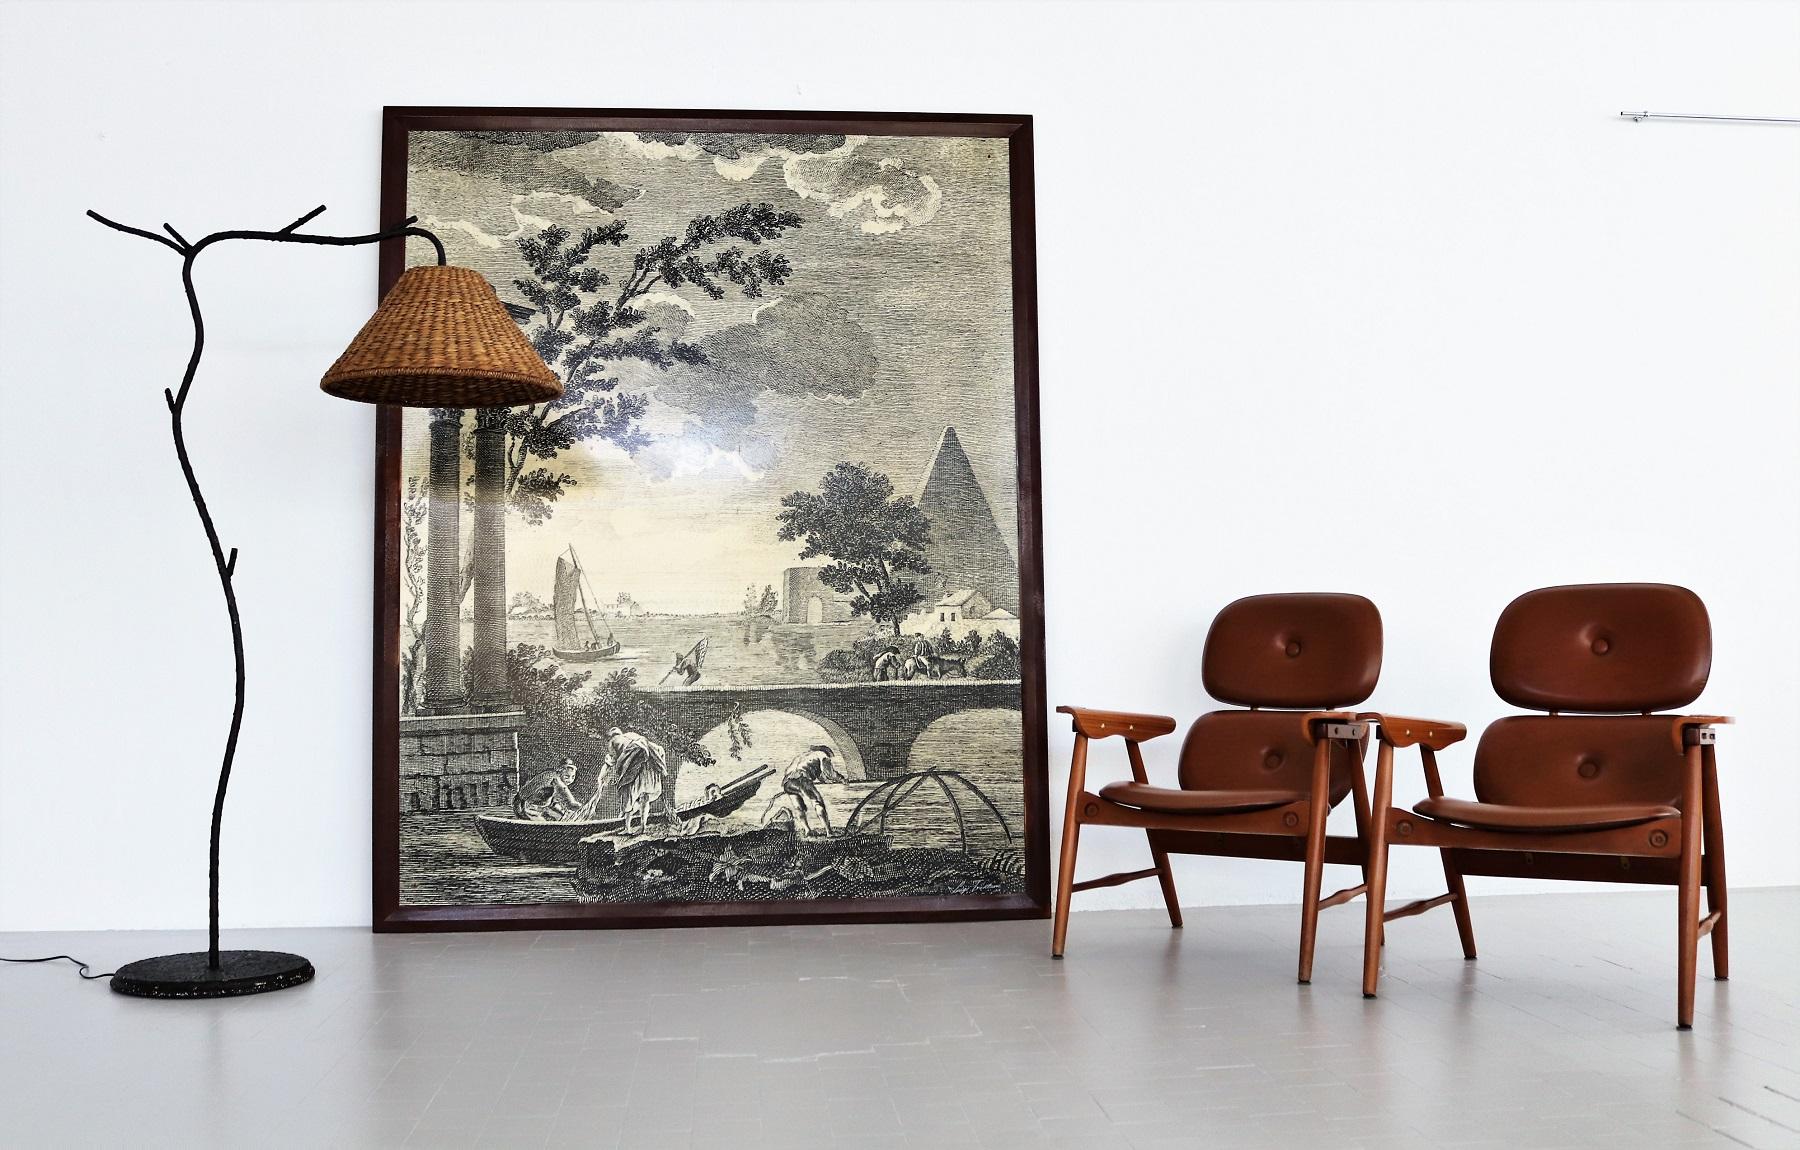 Beautiful and very particular large wall mural or wall panel made of wood chipboard, printed paper and strong layer of resin cover over the paper.
Made in Italy in the 1950s.
The large panel shows a rural scene by the water or in a lagoon with